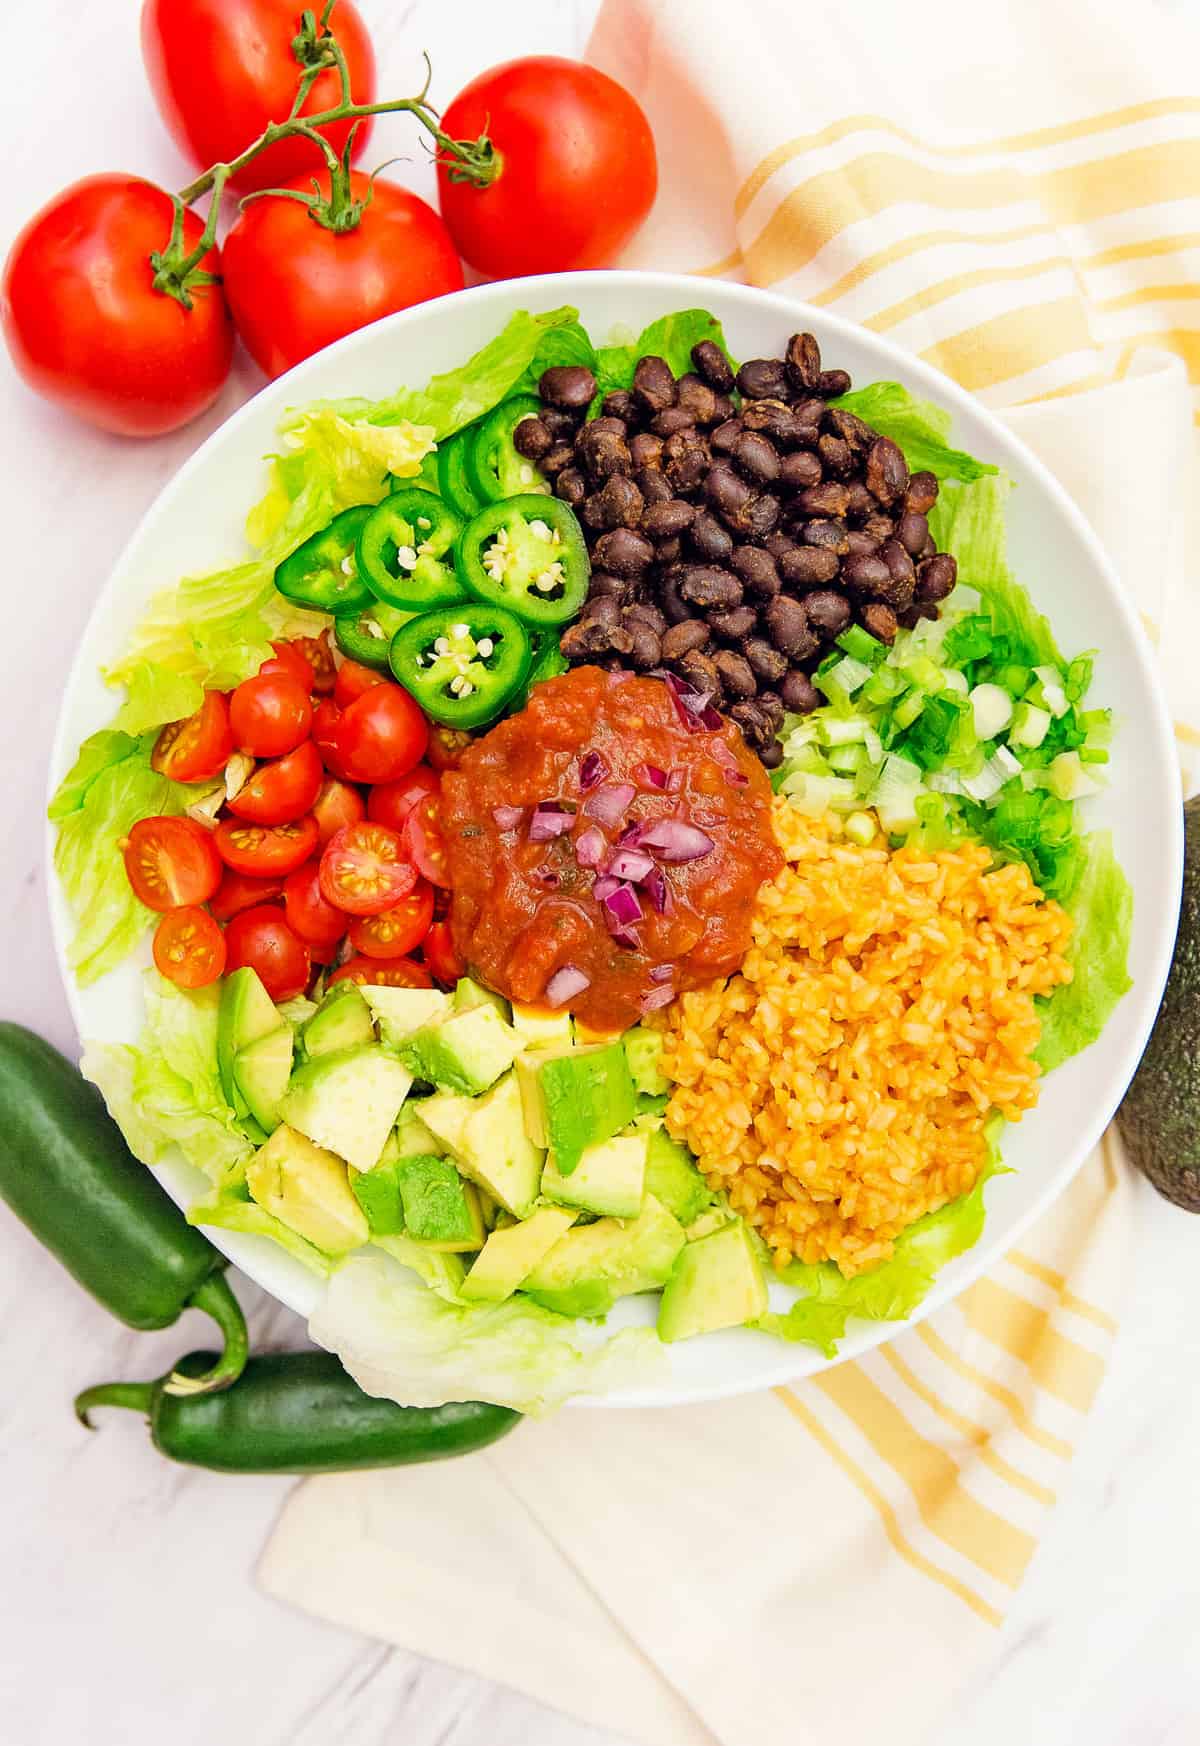 Salsa veggie bowl, veggie bowl, vegan, vegetarian, whole food plant based, gluten free, recipe, wfpb, healthy, oil free, no refined sugar, no oil, refined sugar free, lunch, dinner, easy, fast, quick, dinner party, entertaining, Spanish rice, rice, black beans, green onions, tomatoes, jalapeño, quick dinner, avocado, salsa dressing, fast dinner, dairy free, no dairy, Mexican, Southwestern